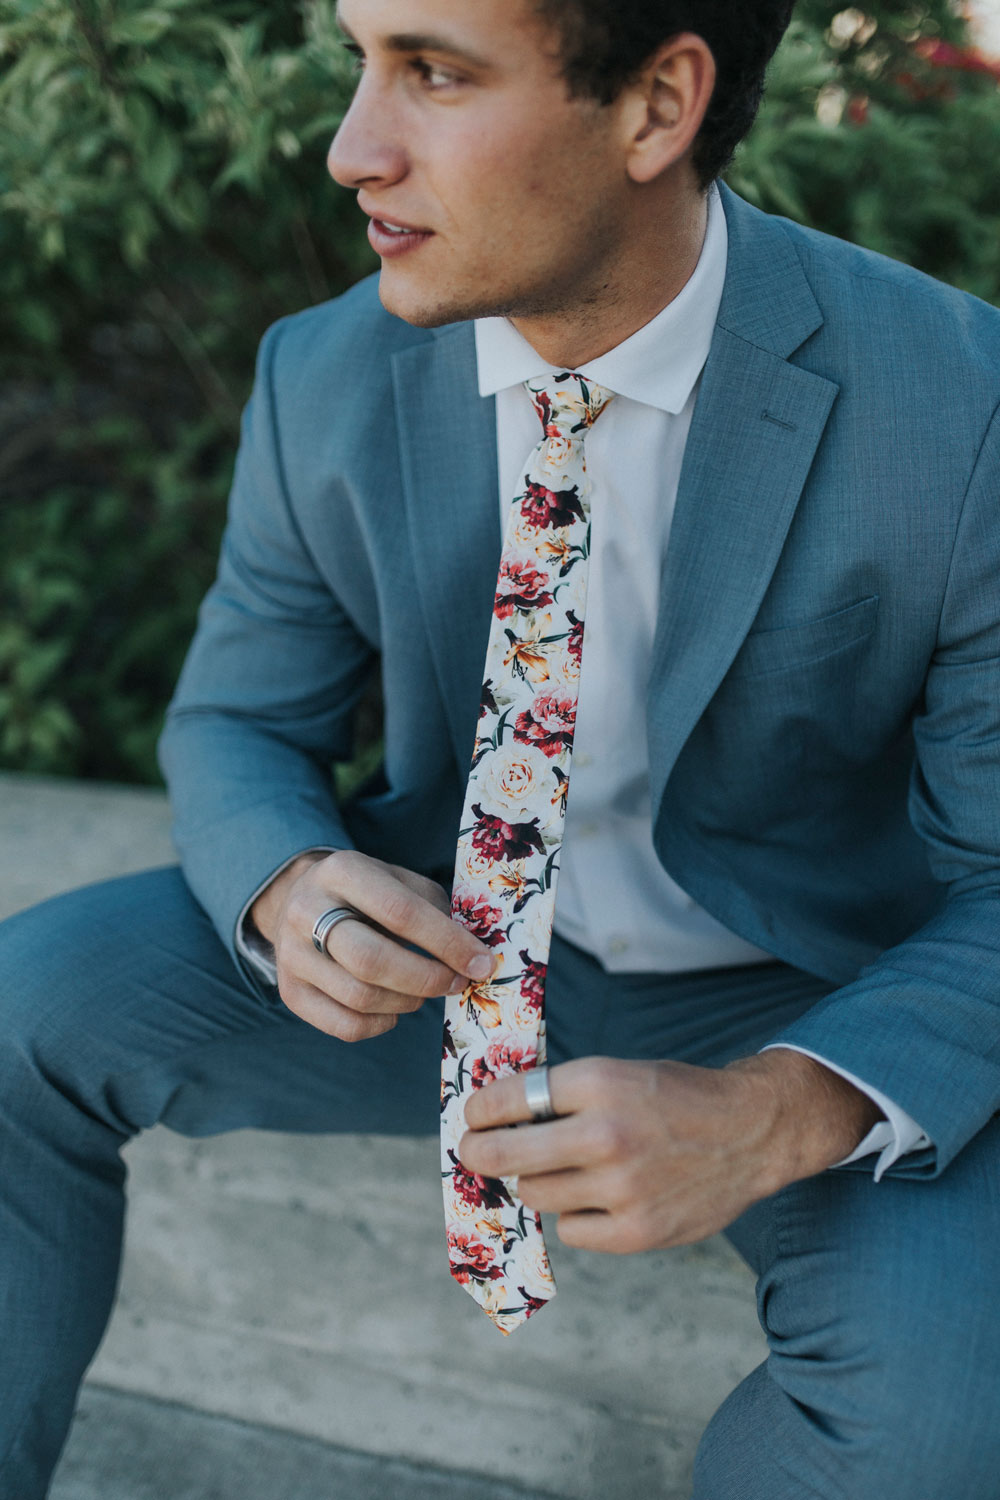 Coral Void tie worn with a white shirt and blue suit.